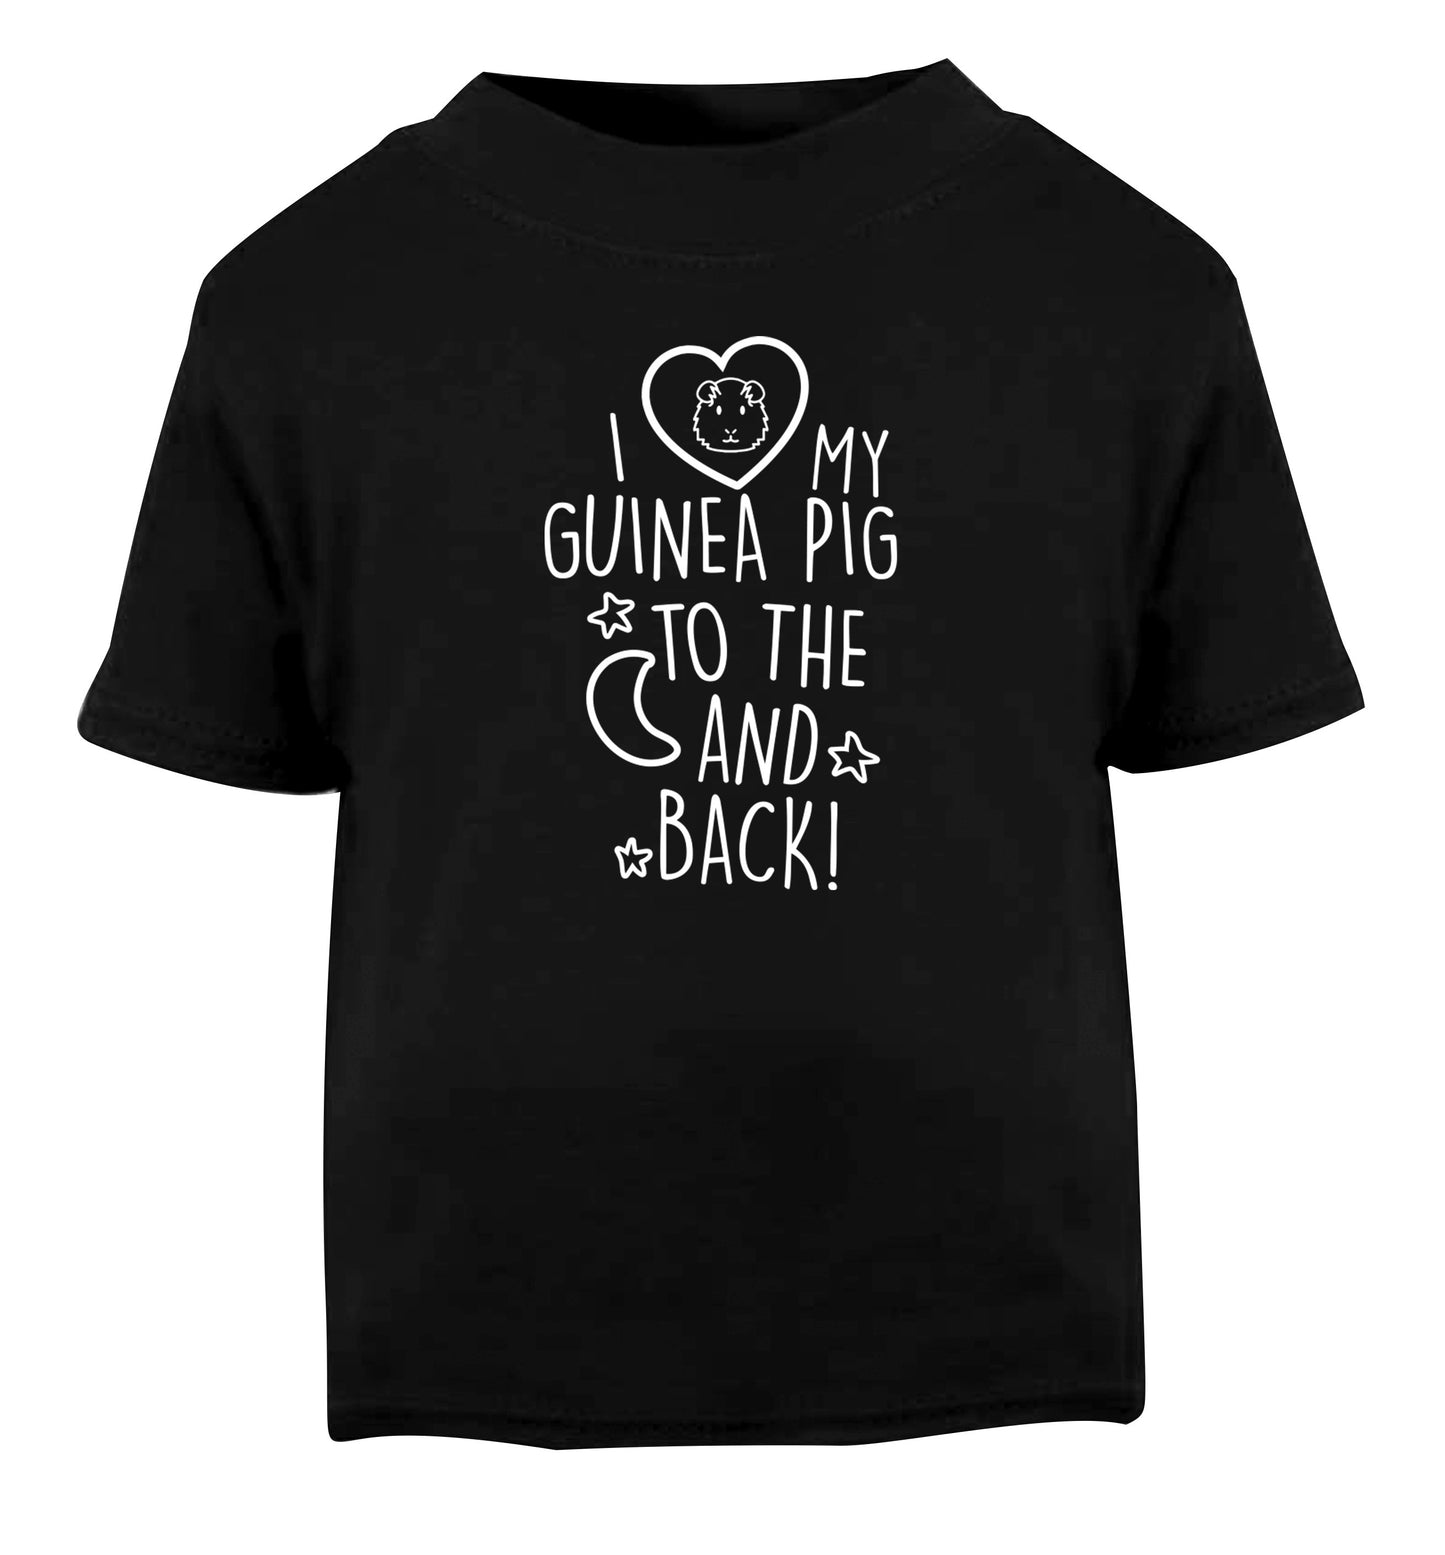 I love my guinea pig to the moon and back Black Baby Toddler Tshirt 2 years